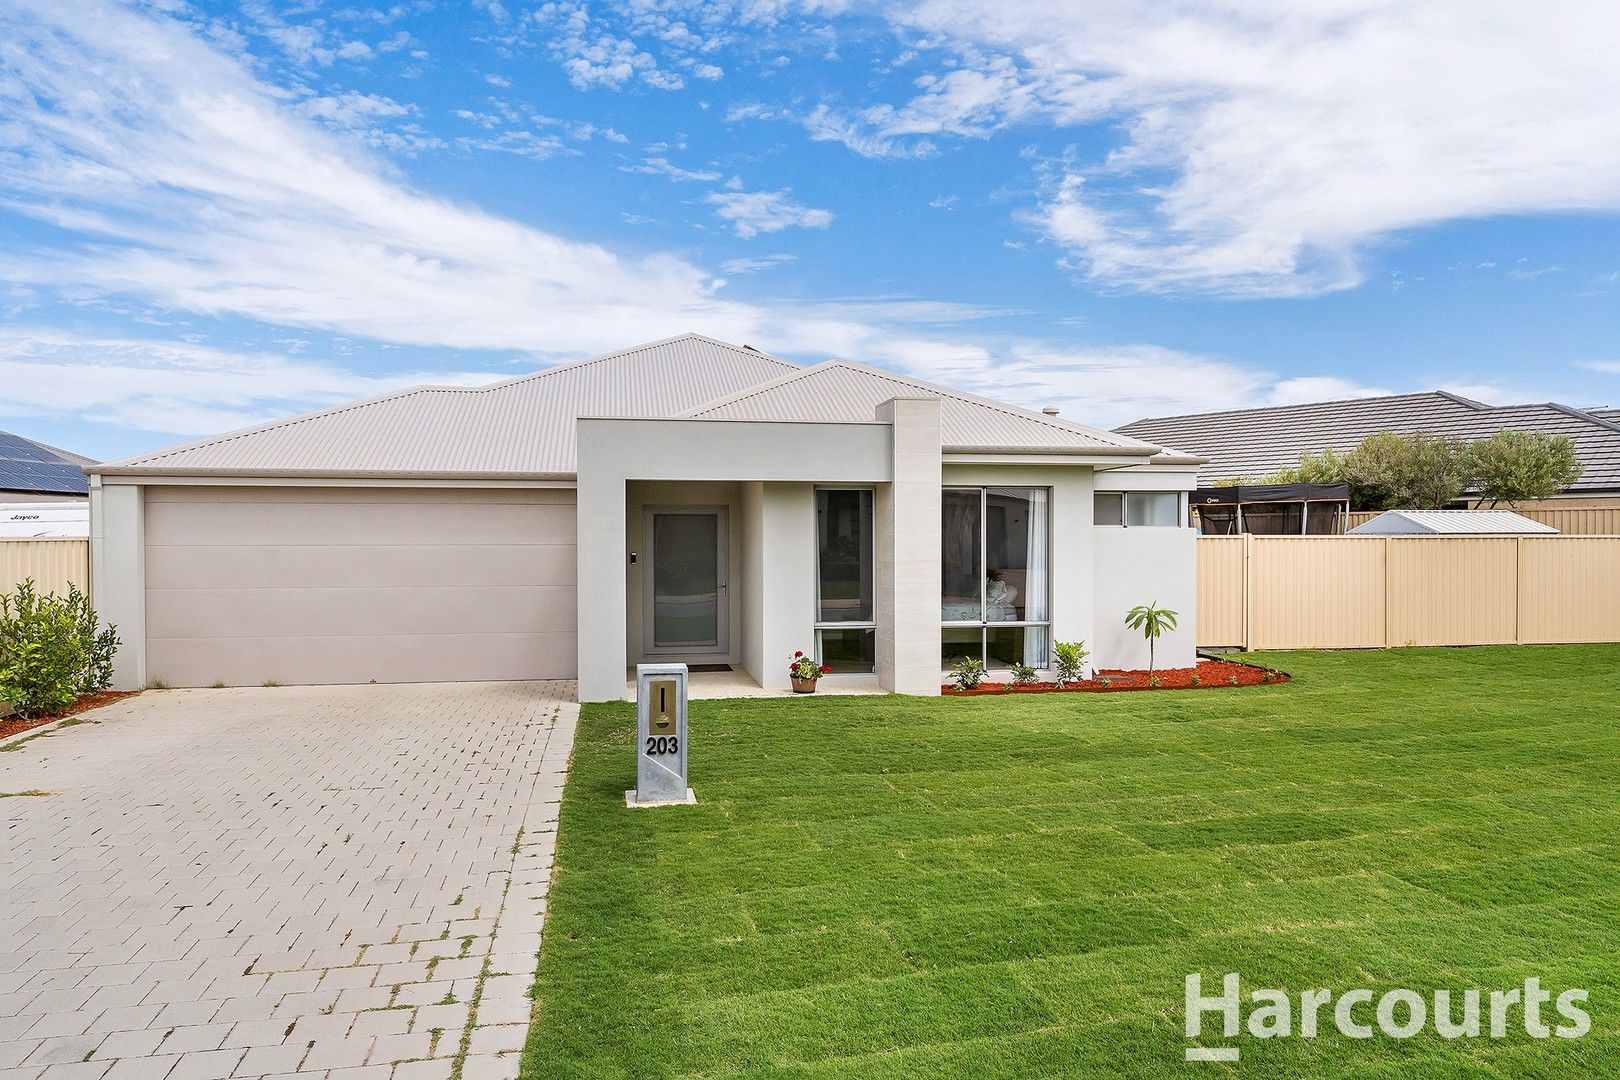 4 bedrooms House in 203 Foreshore Drive SINGLETON WA, 6175